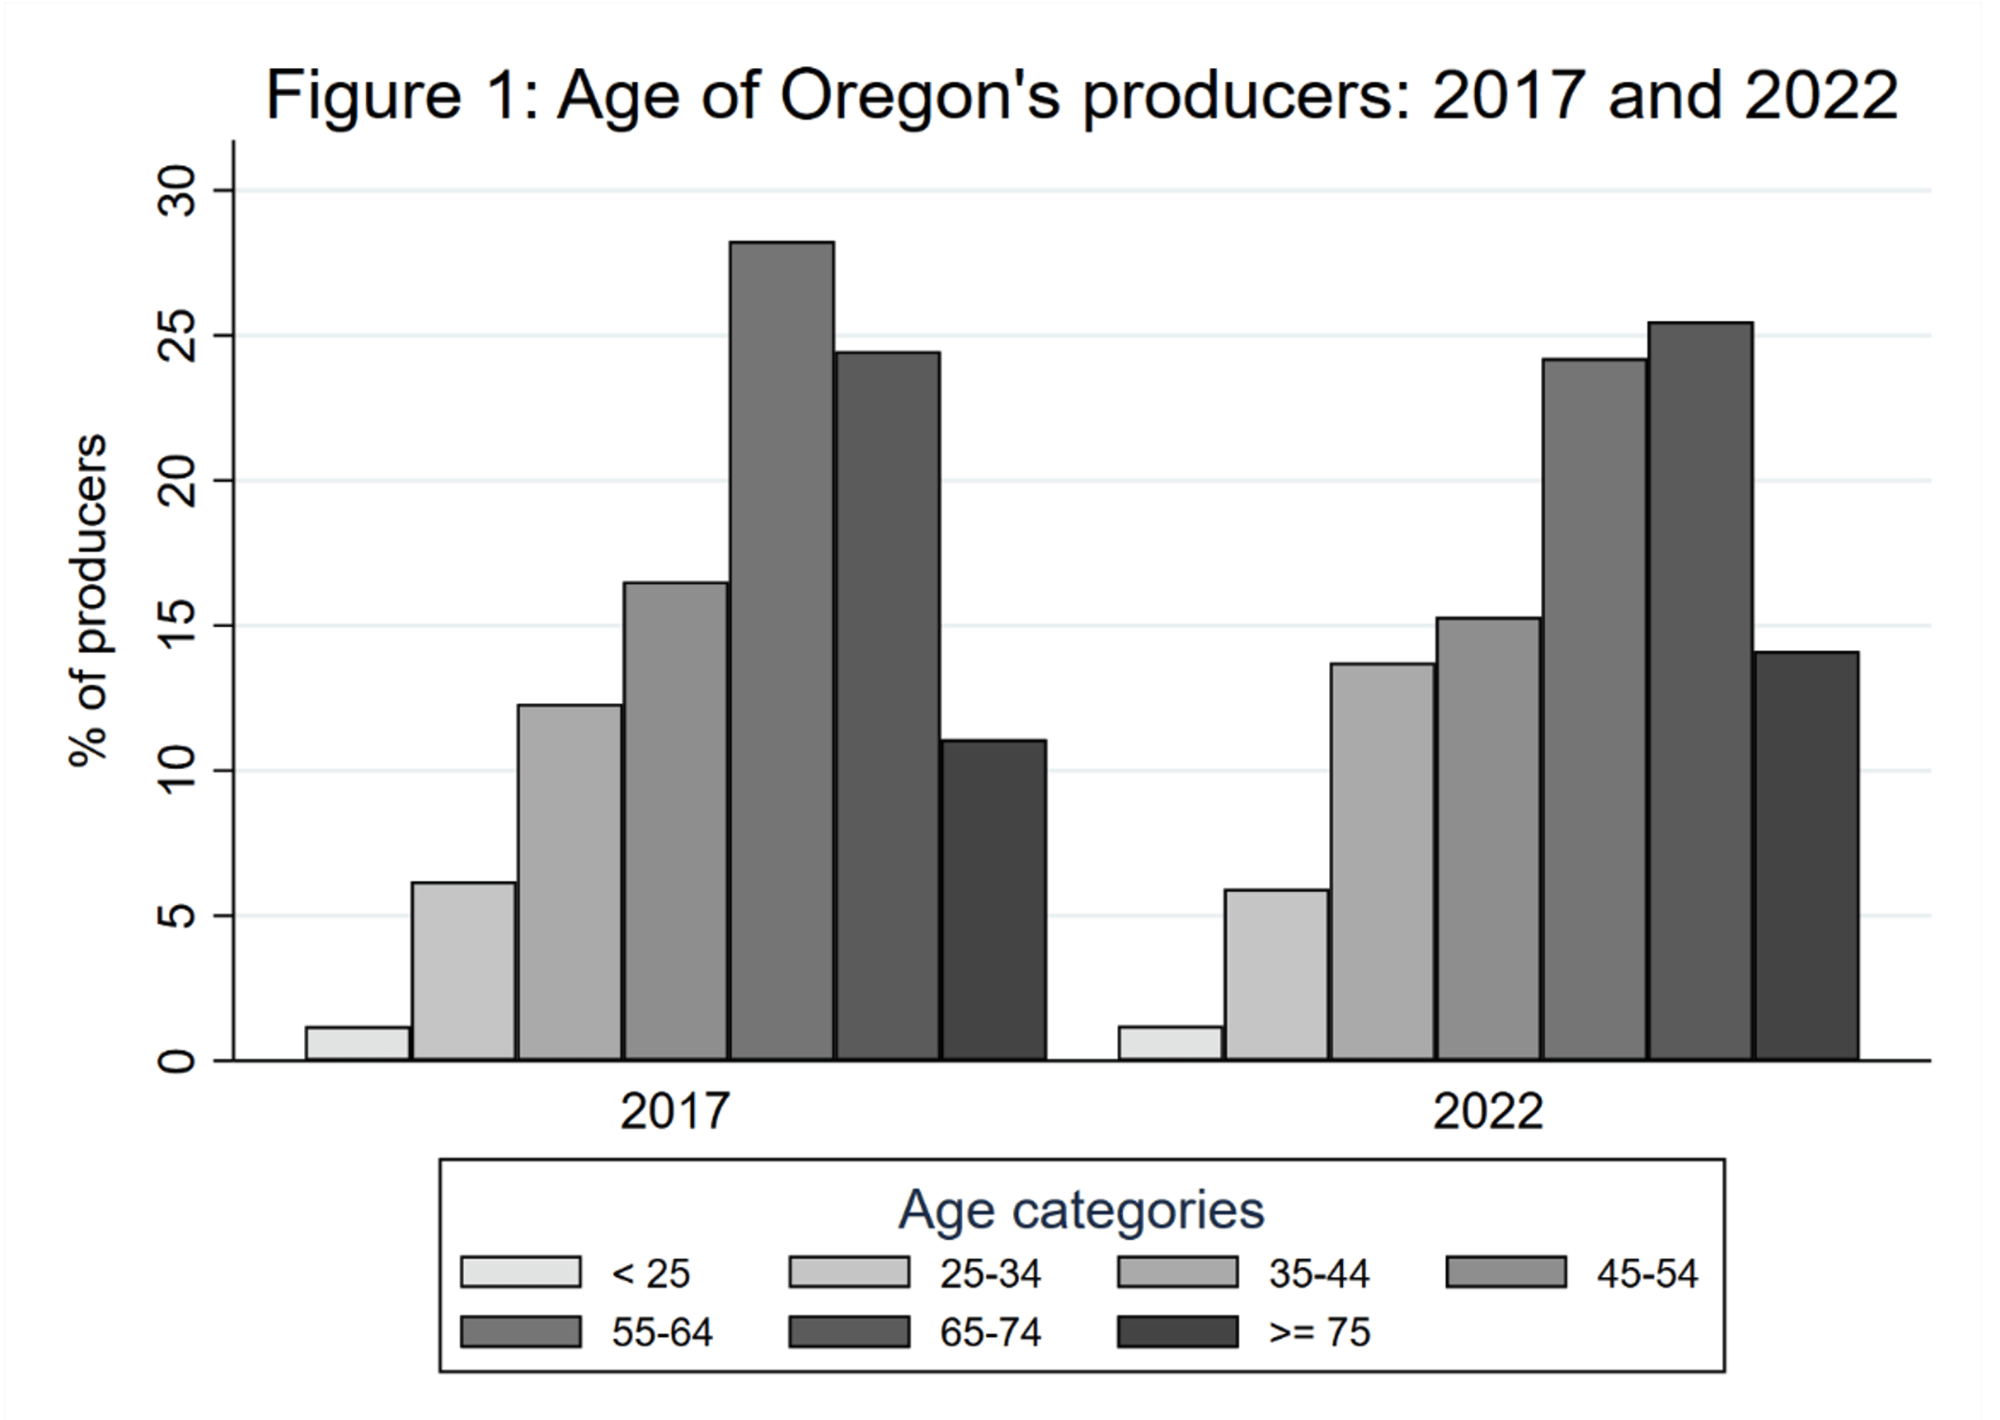 Figure 1 bar chart showing % of producers by age categories with highest in 55-74, though 55-64 dropped to slightly lower than 65-74 in 2022.